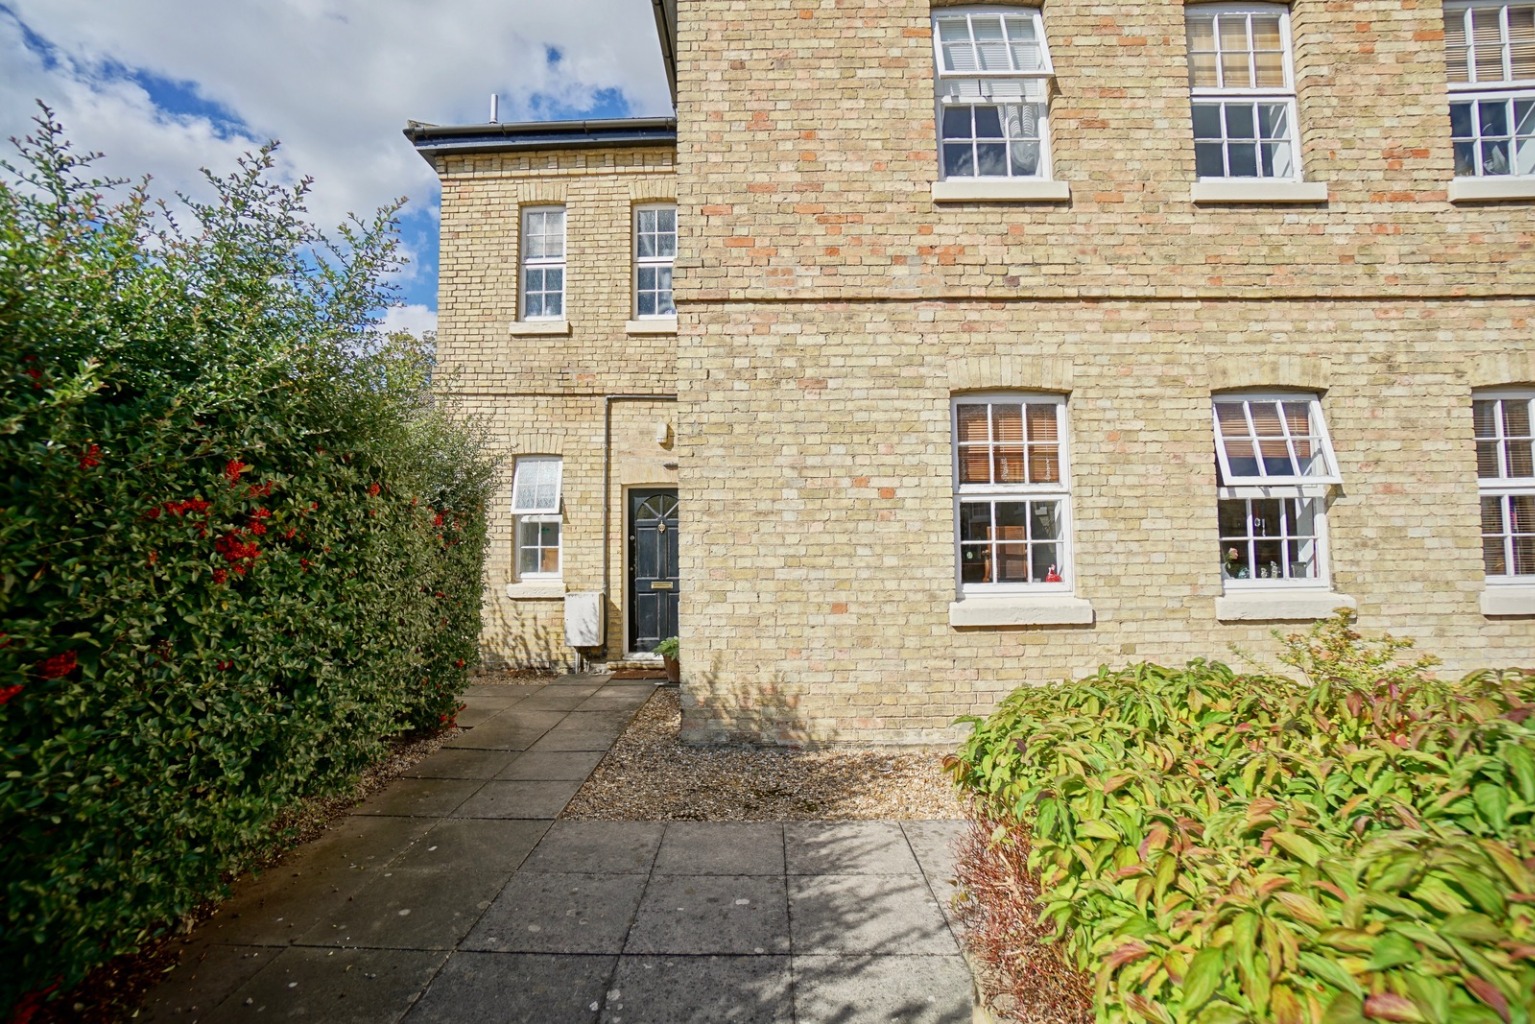 1 bed ground floor flat for sale in Linclare Place, St. Neots, PE19